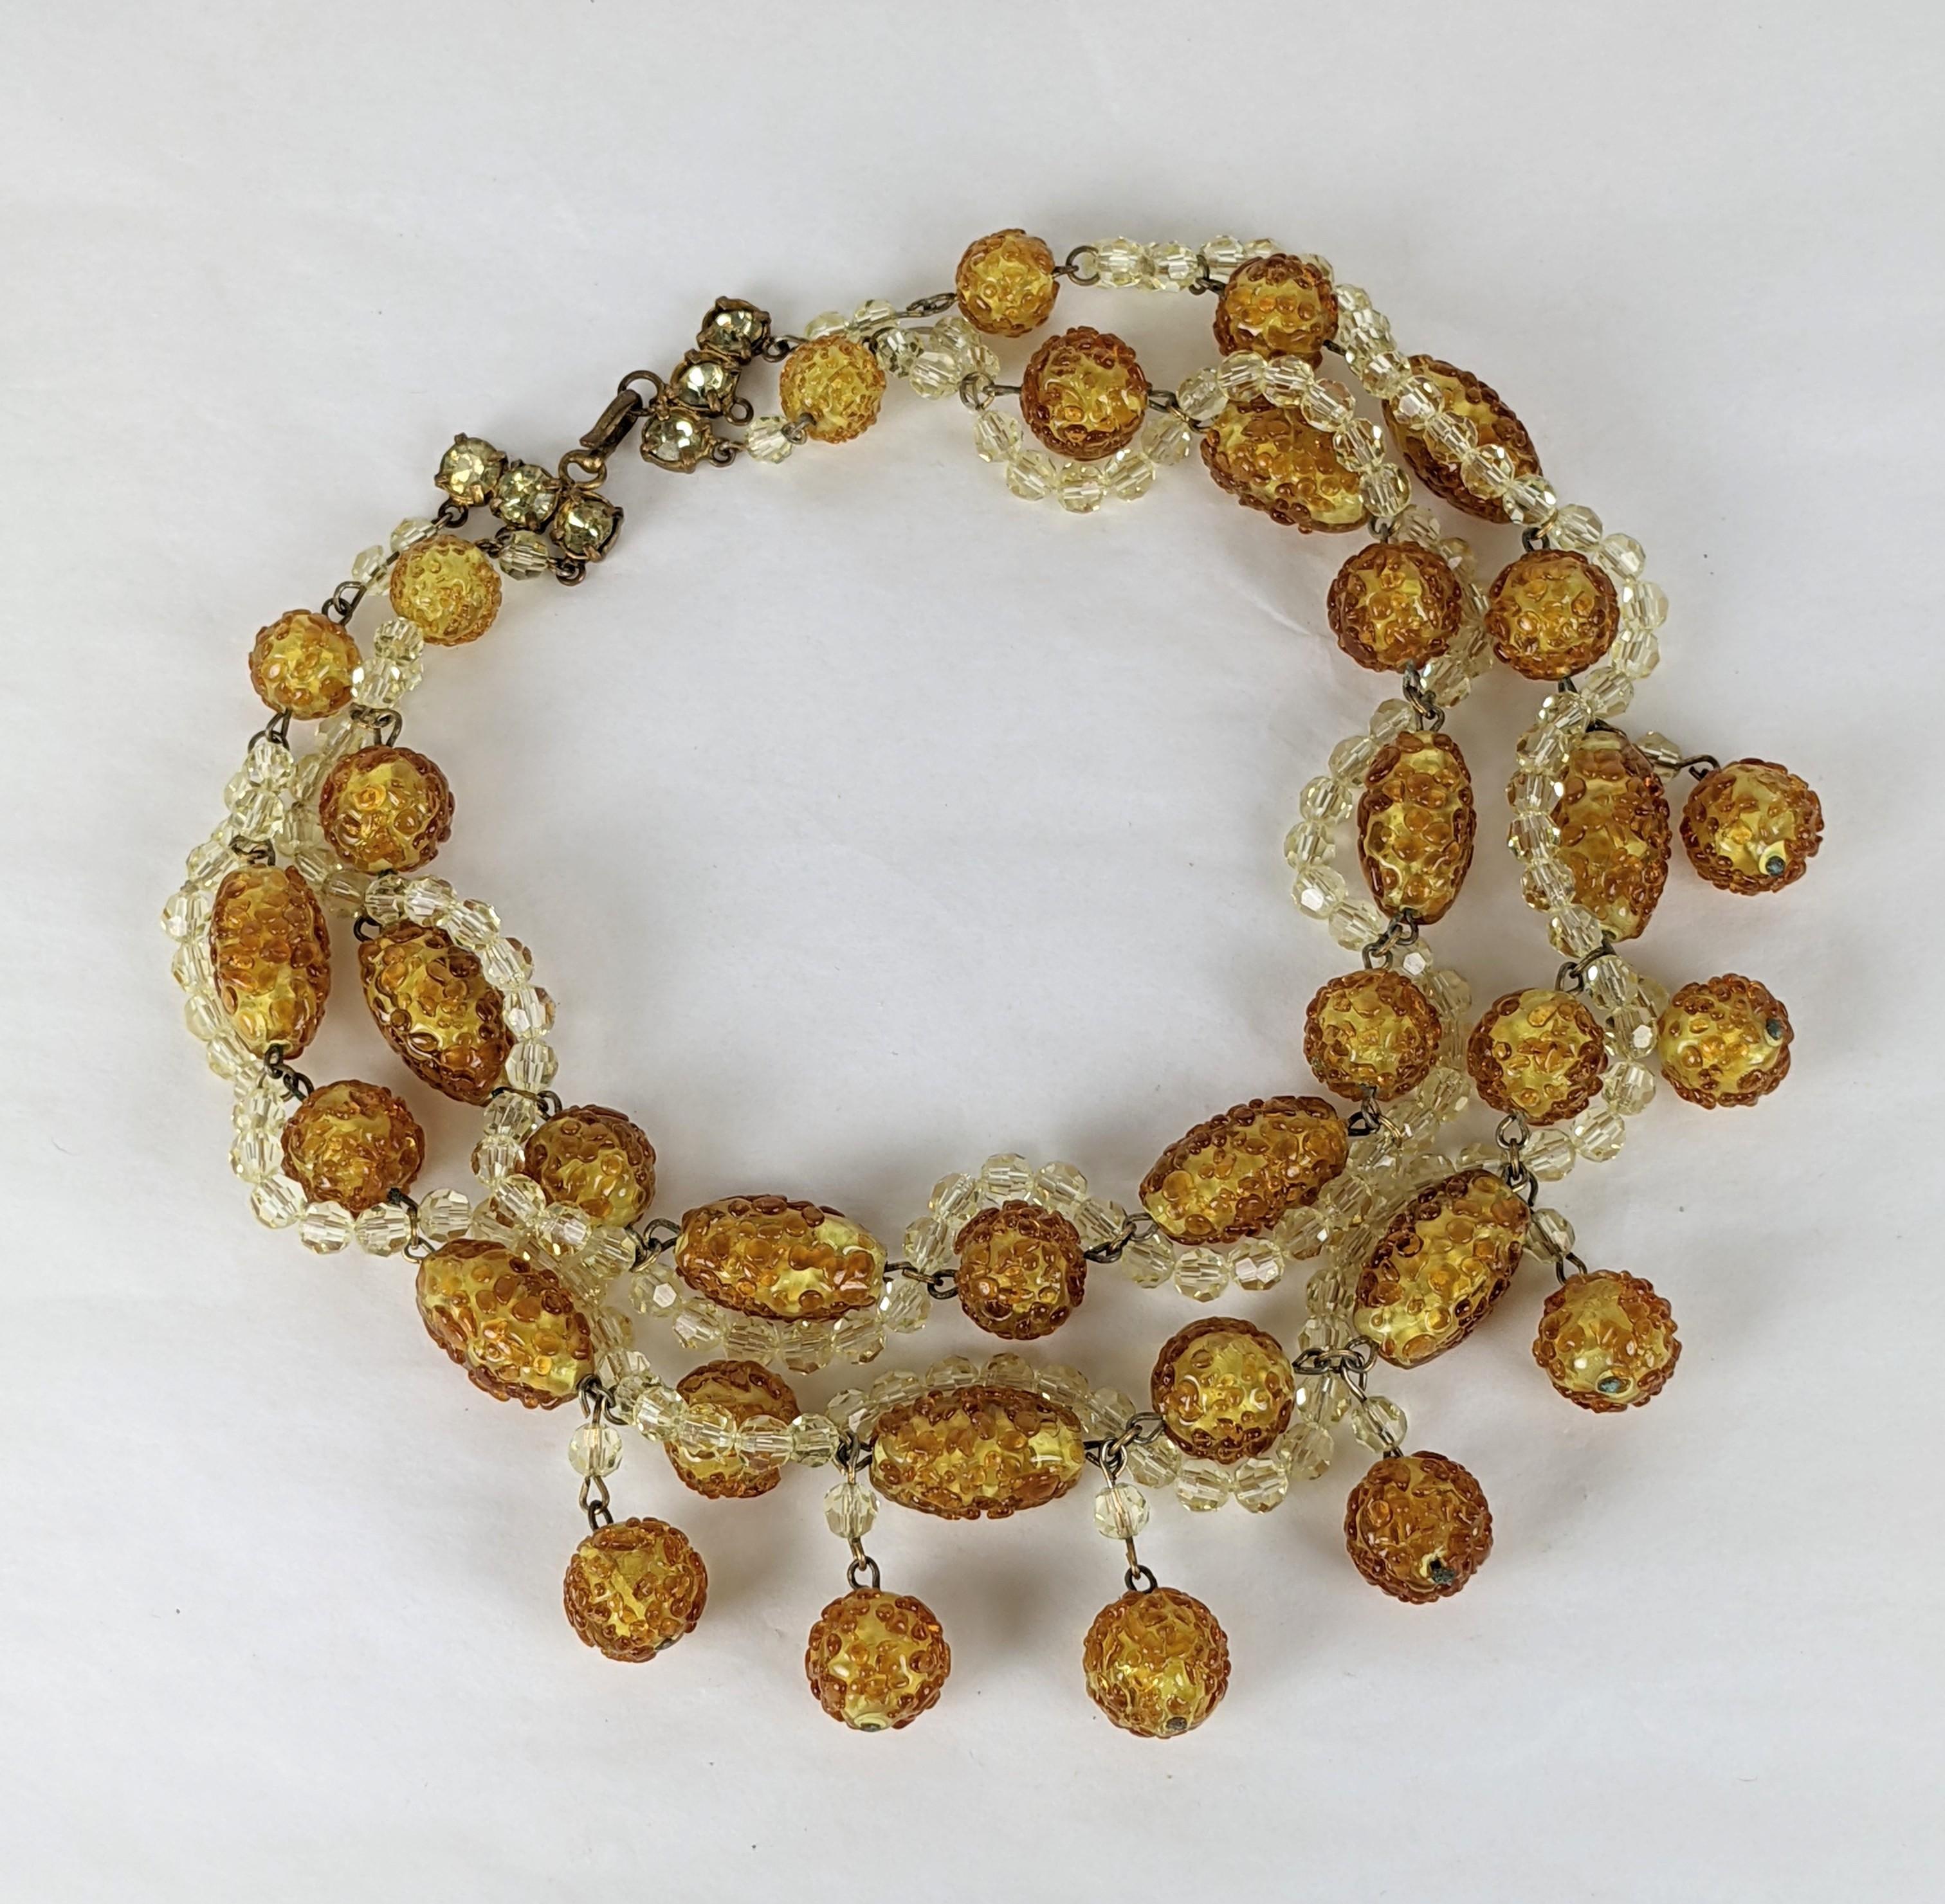 Unusual Madeleine Riviere rare Maison Gripoix bead and crystal collar. The two strand necklace has pendant drops which have hand poured mottled glass over each pate de verre topaz Gripoix bead. Strung with small citrine faceted crystals. Clasp of